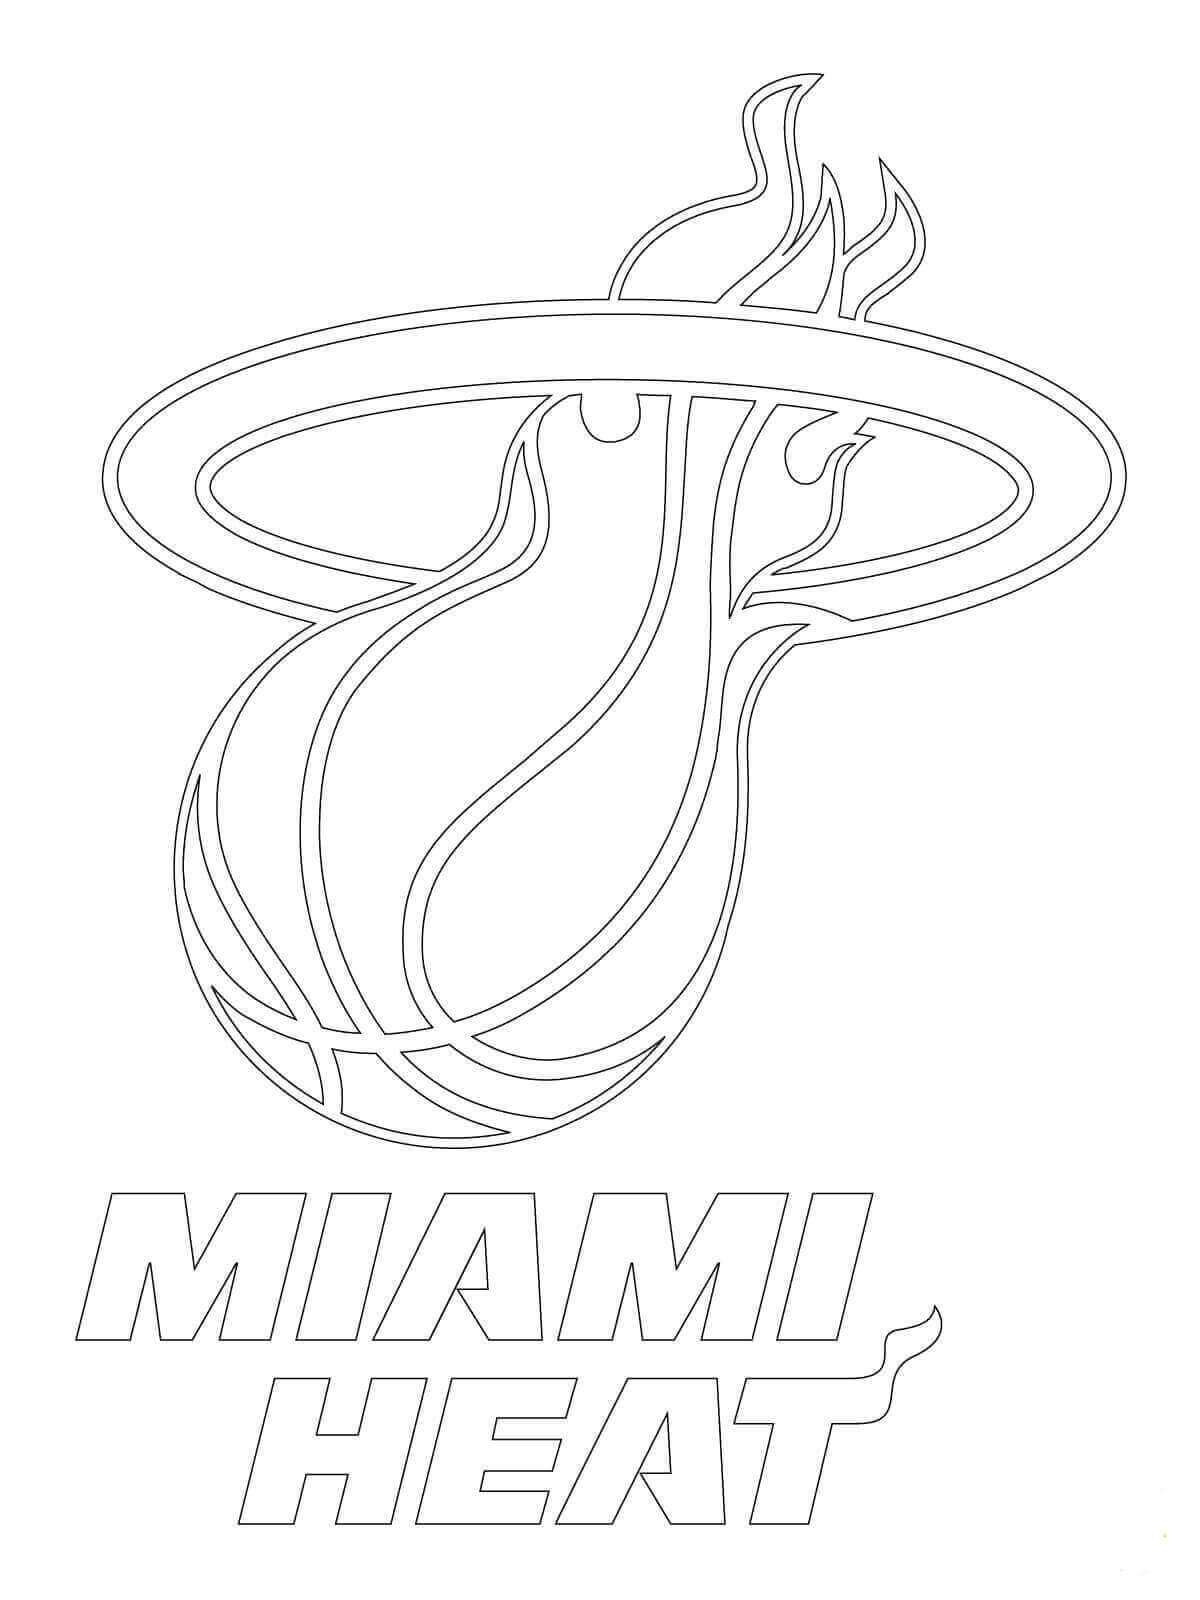 miami heat coloring pages